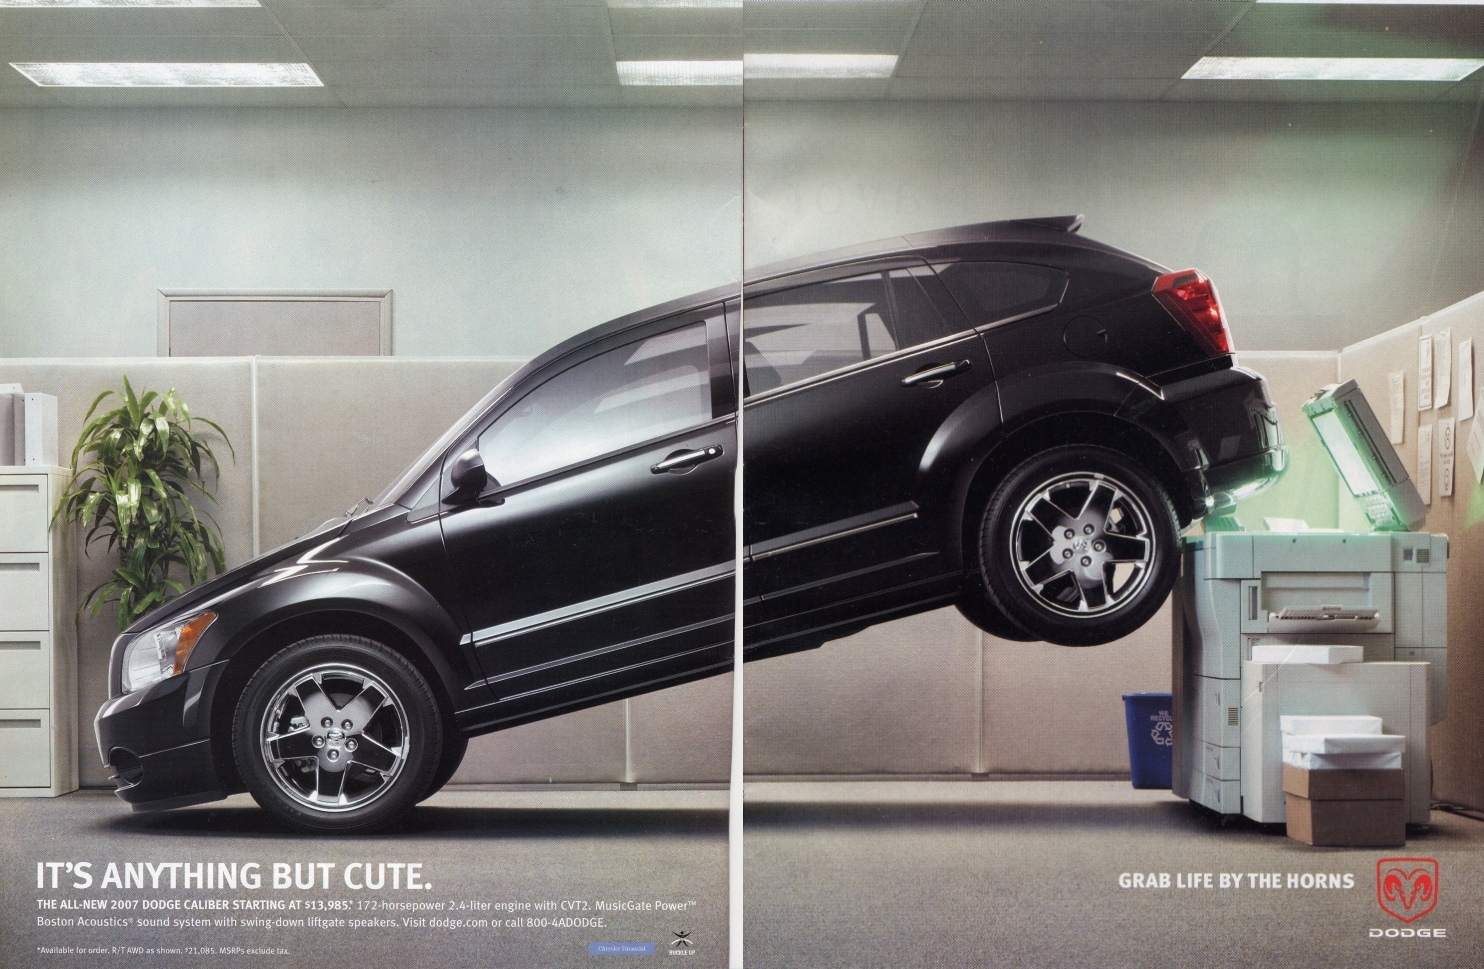 2011 Dodge Caliber on Campaign Portrays Dodge Caliber As Wise Ass Little Shit